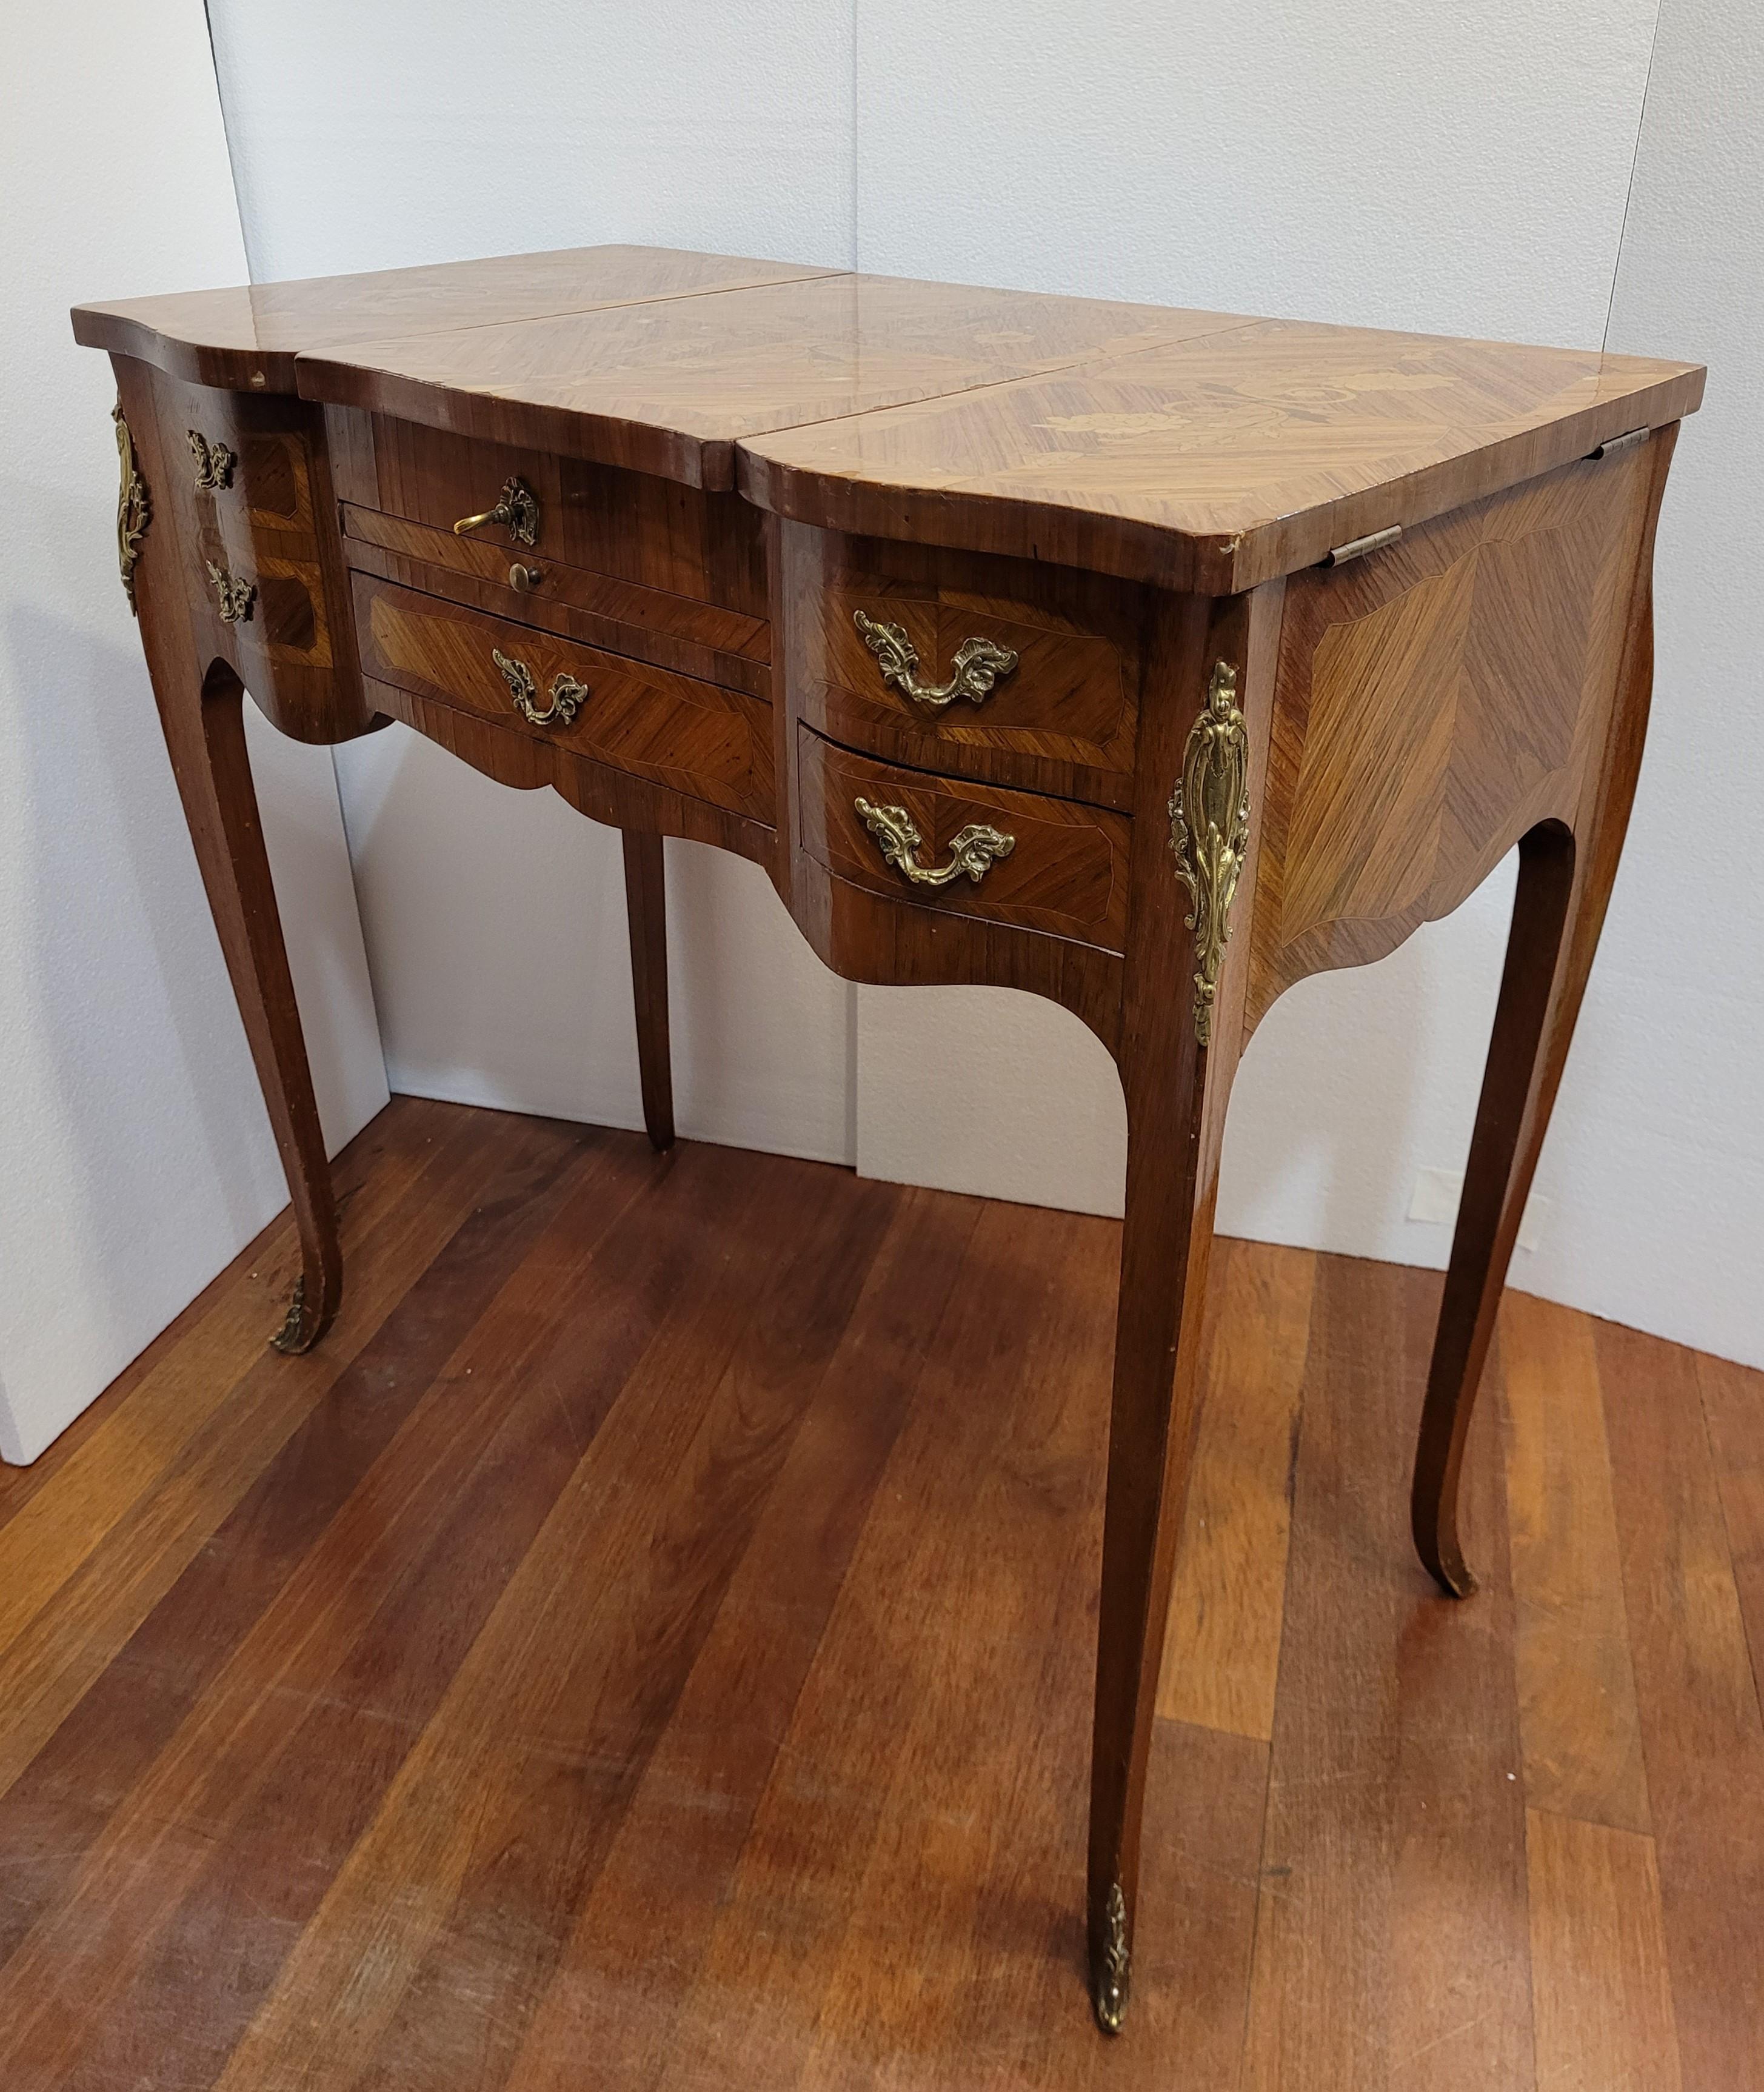 Amazing and refined Louis XV   poudreuse or dressing table made in Napoleon III-era France, mid-19th century. It presents extraordinary marquetry of good invoice; different woods are used for the ornaments, both polygonal and floral. This light